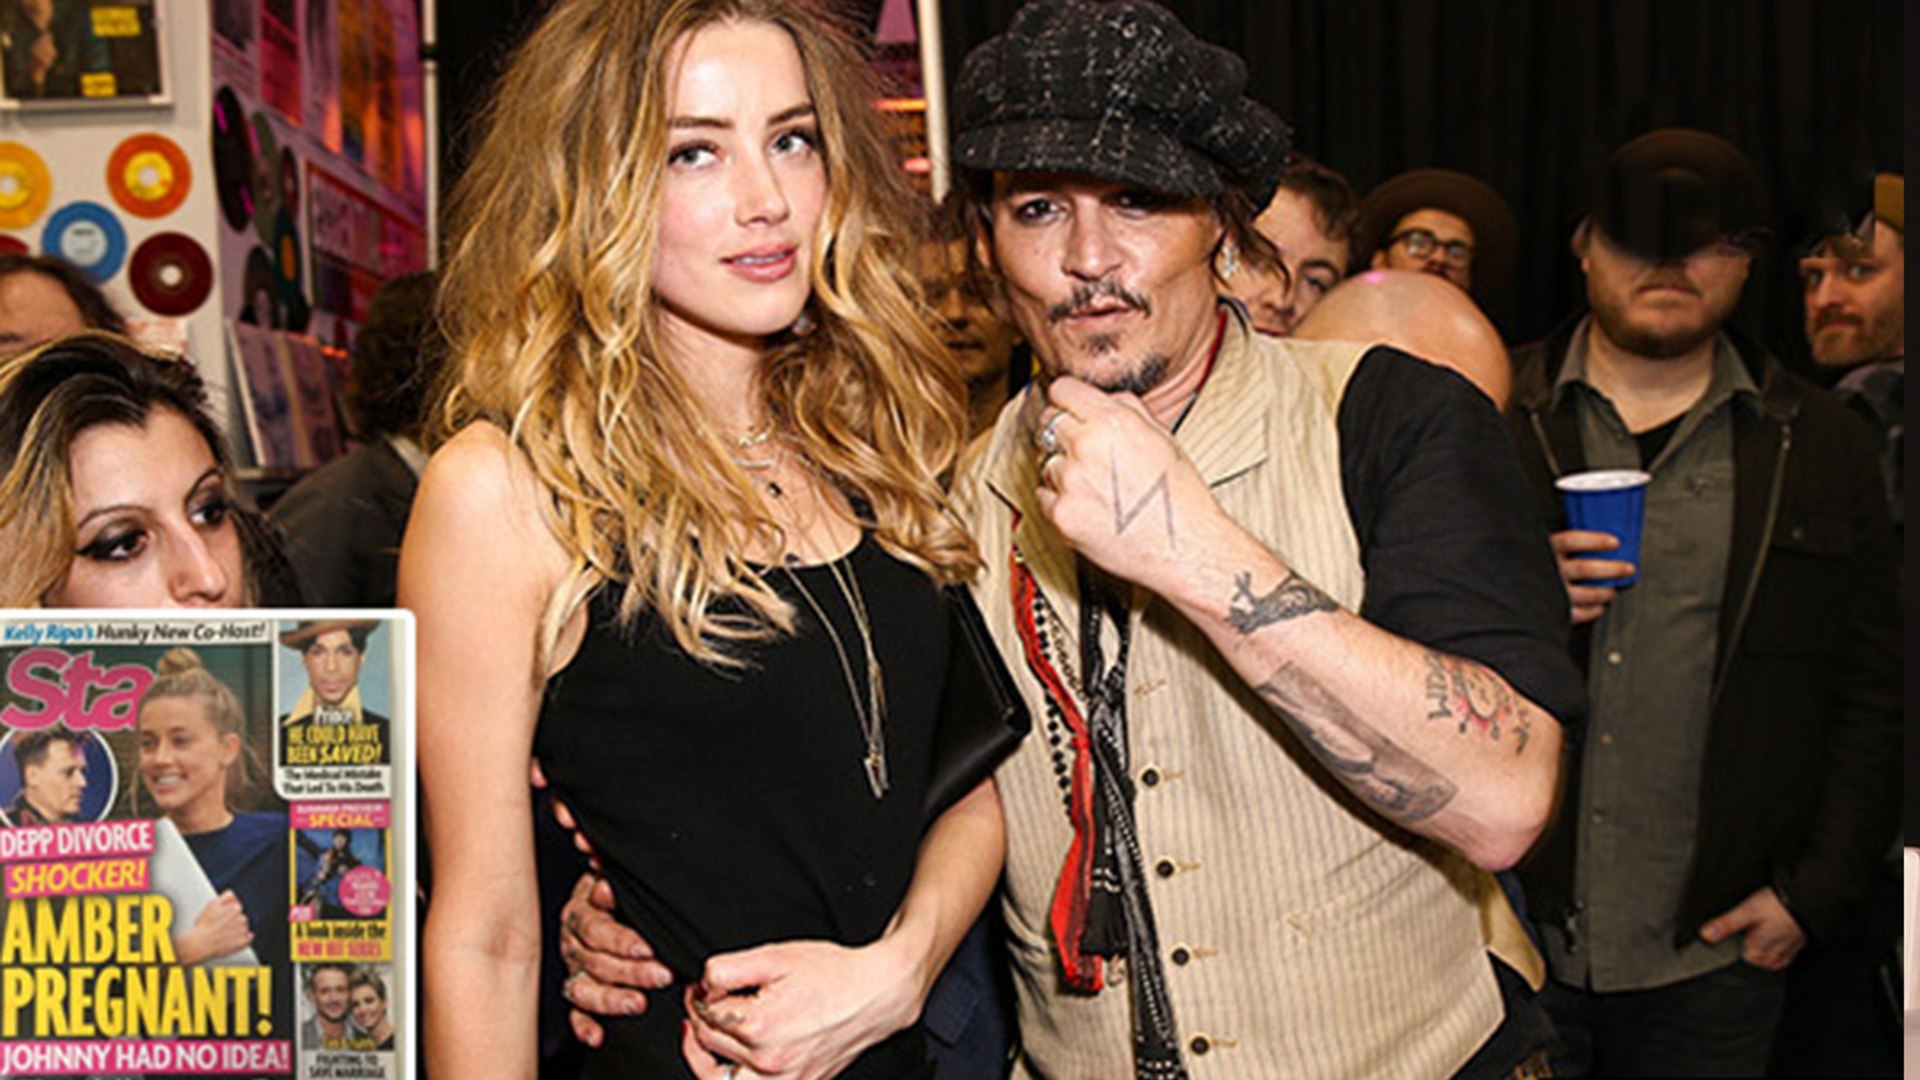 Amber Heard Pregnant with Johnny Depp Baby